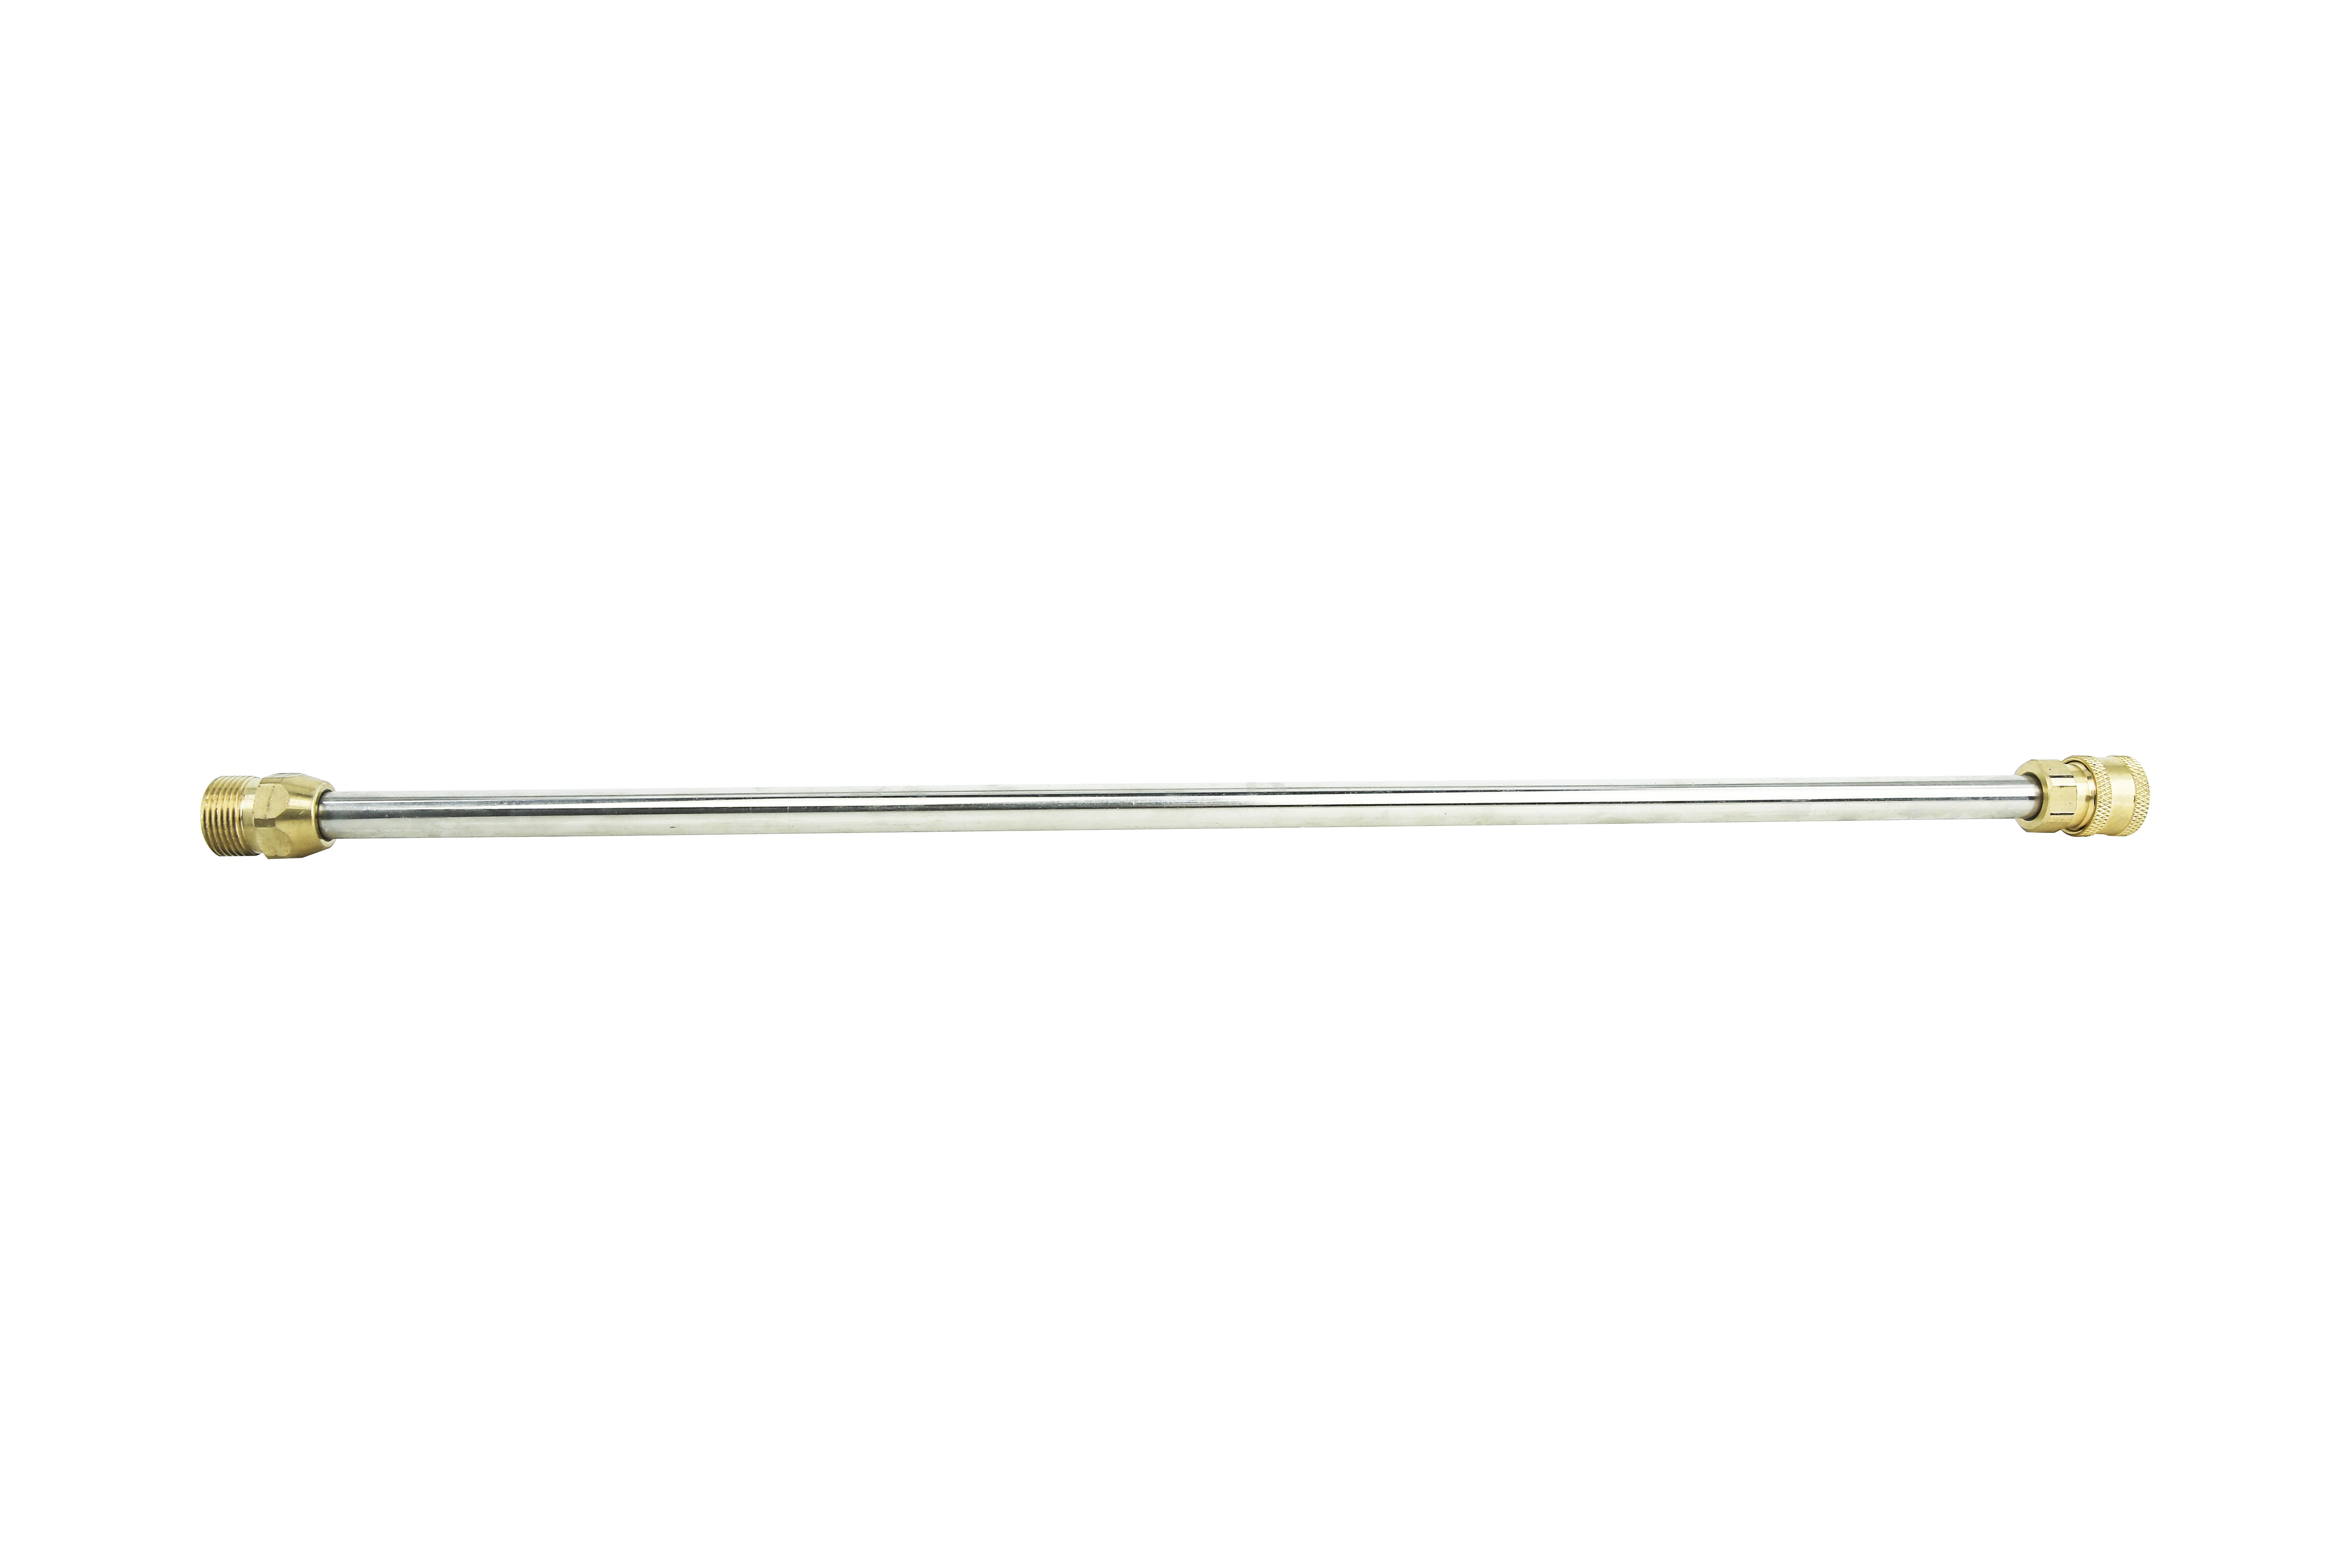 Hyper Tough 21" Wand for Pressure Washer, Max 4500PSI Stainless Steel